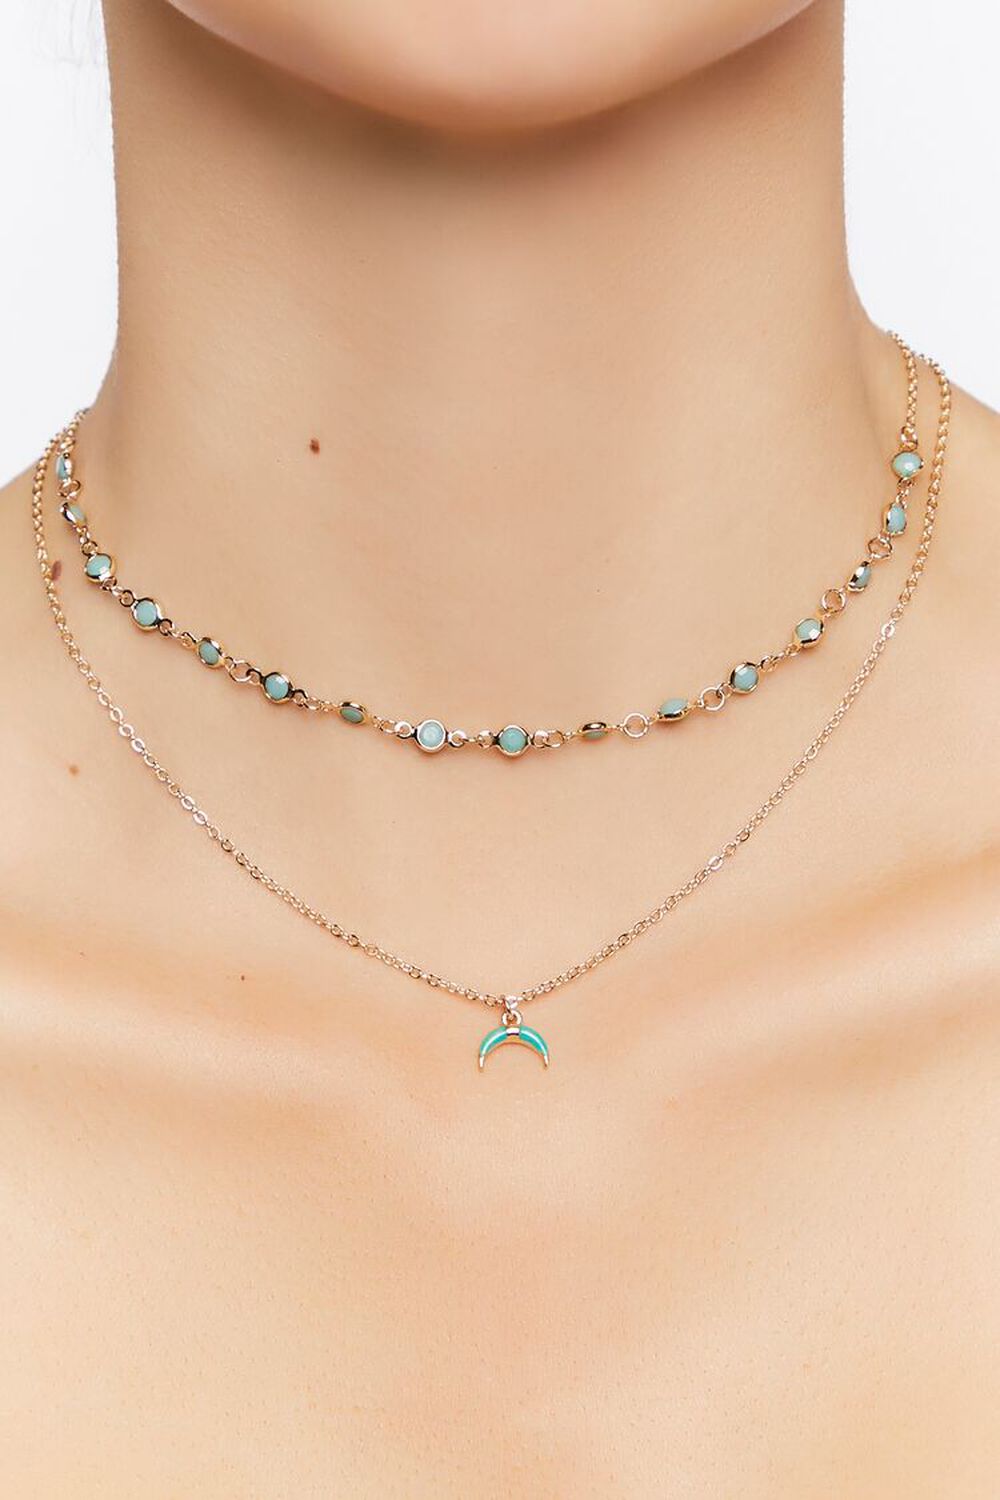 TURQUOISE/GOLD Horn Charm Necklace Set, image 1